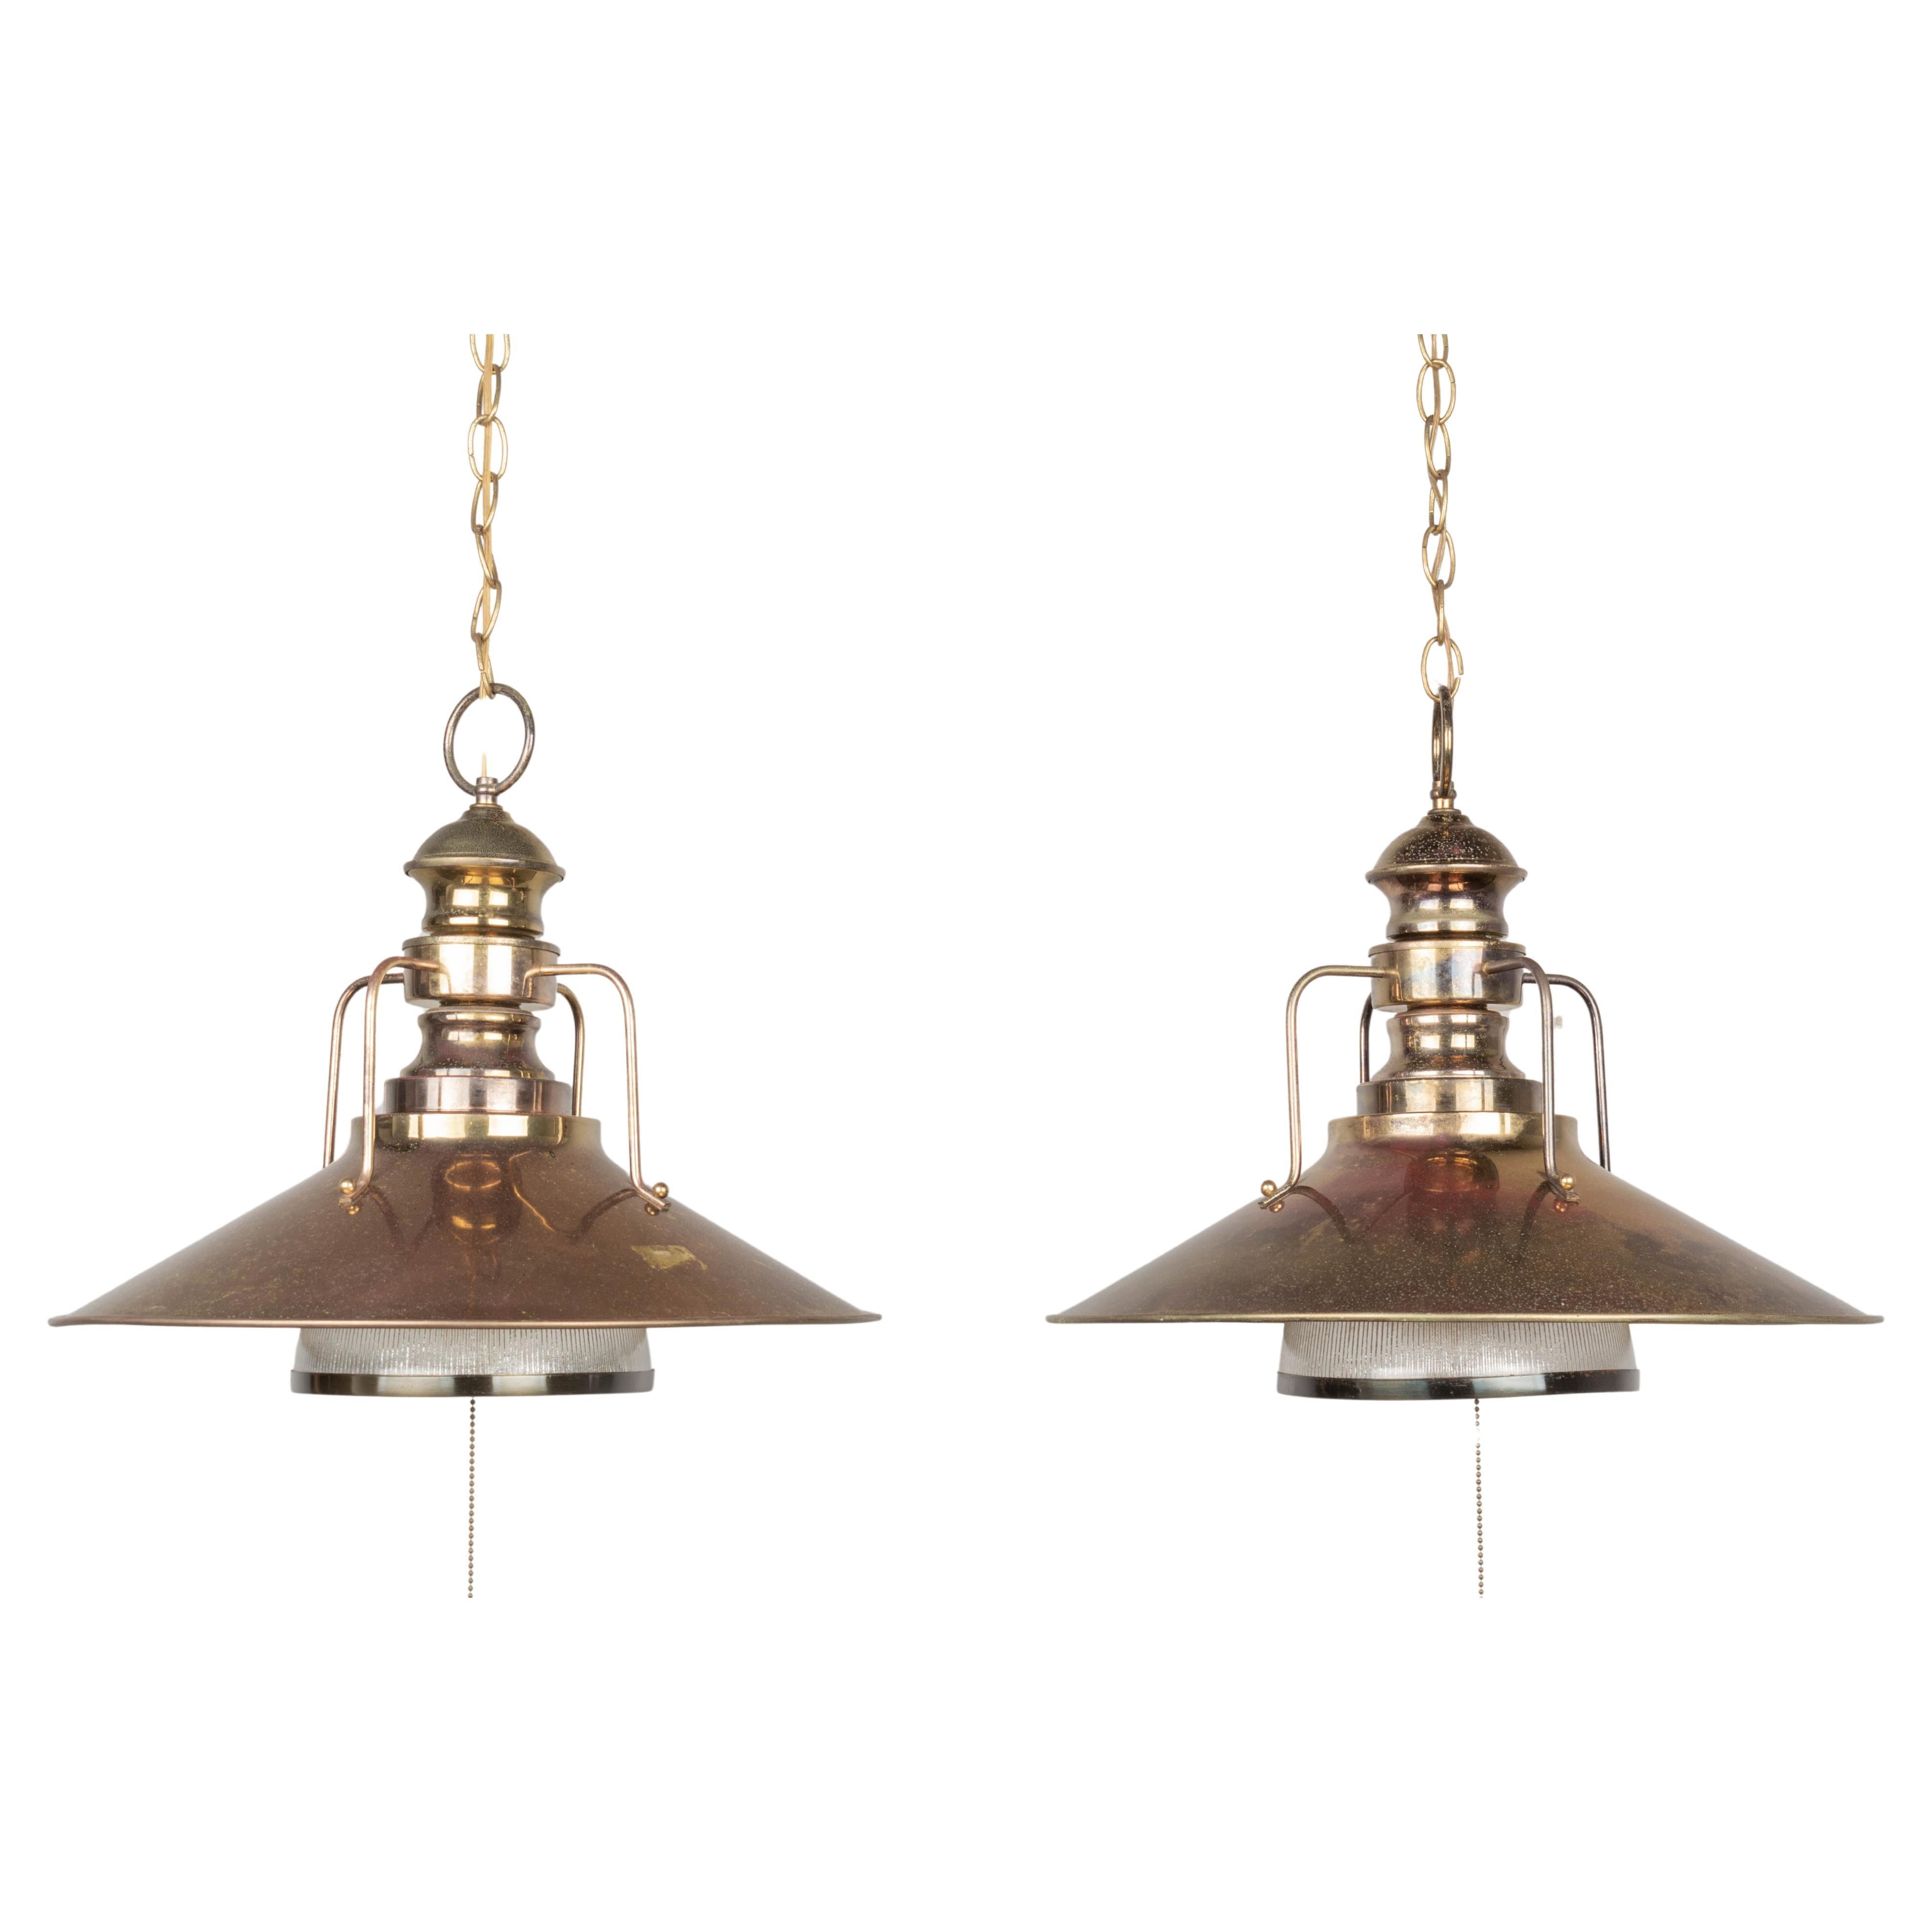 Industrial Railway Station Pendant Lights, a Pair